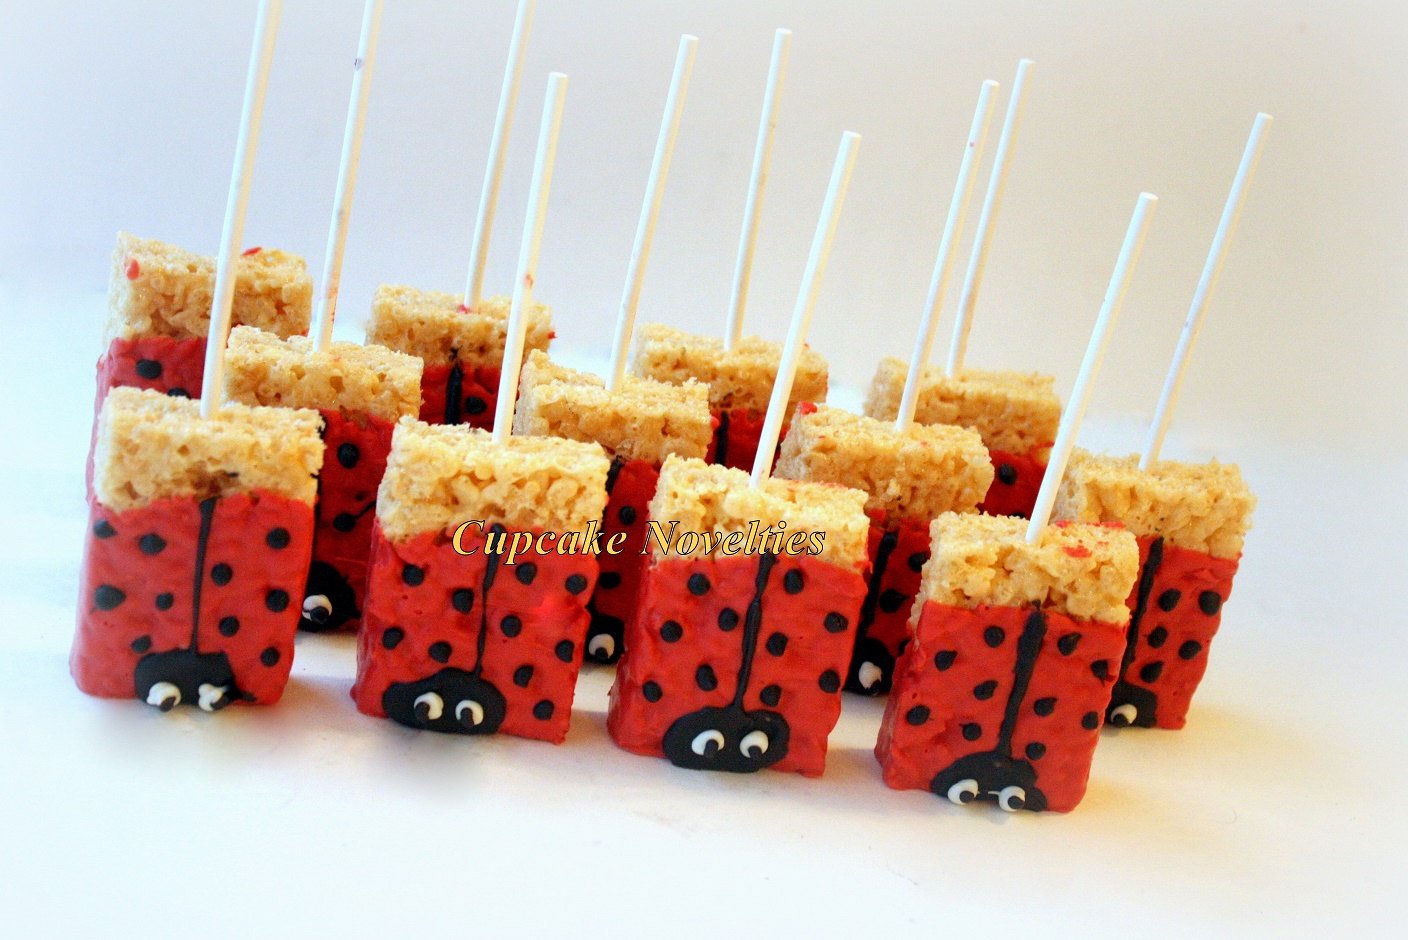 Ladybug Birthday Party Favors Dessert Chocolate dipped Rice KrispieTreats Valentines Day Edible Favor Cookies Ladybug Baby Shower Cute Ideas